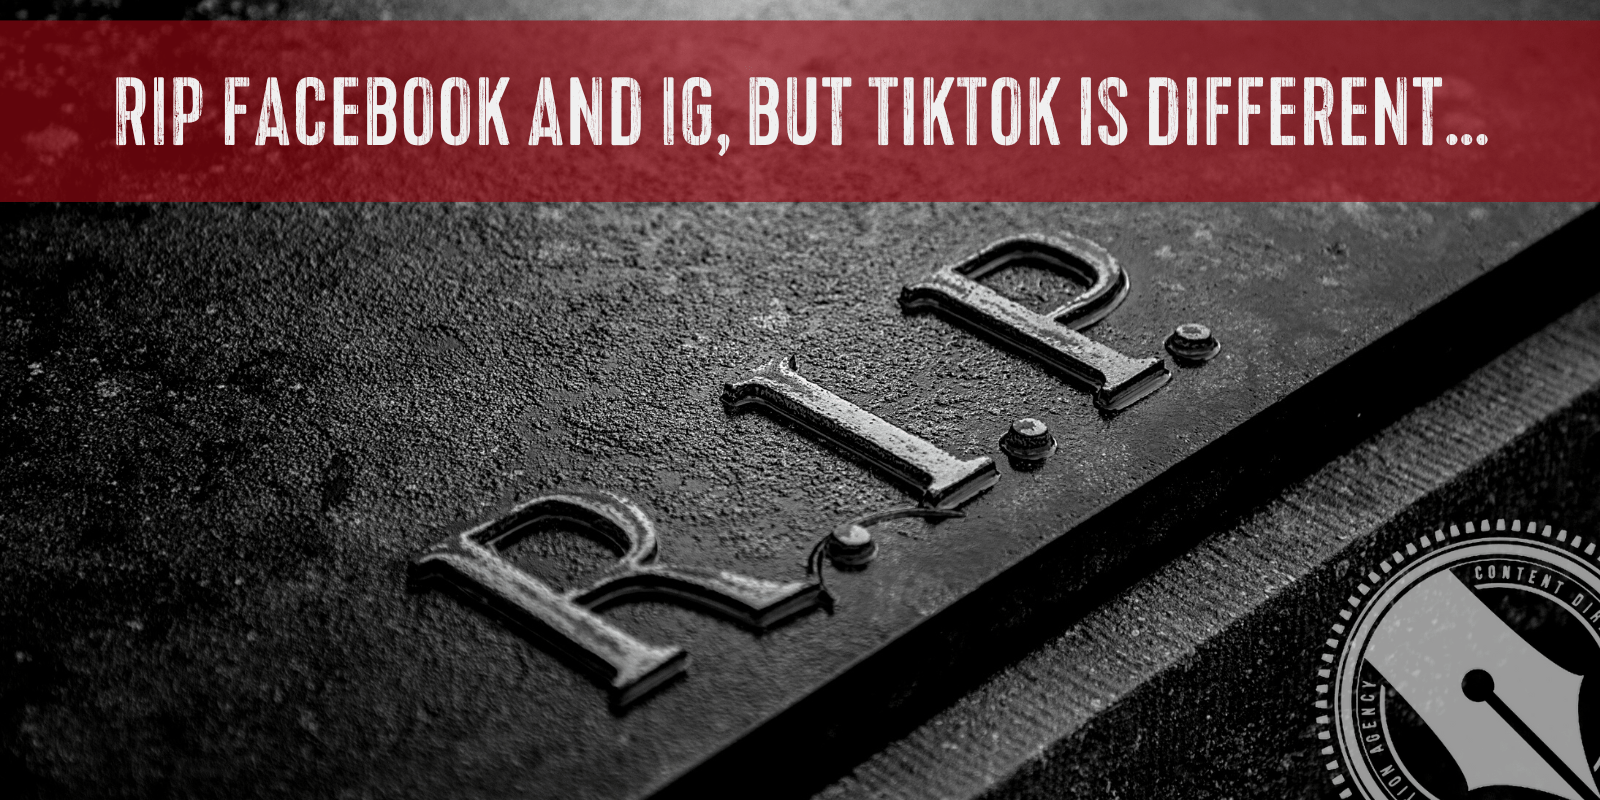 RIP Facebook and IG, but TikTok is different… over a photo of the letters RIP on, presumably, a headstone.